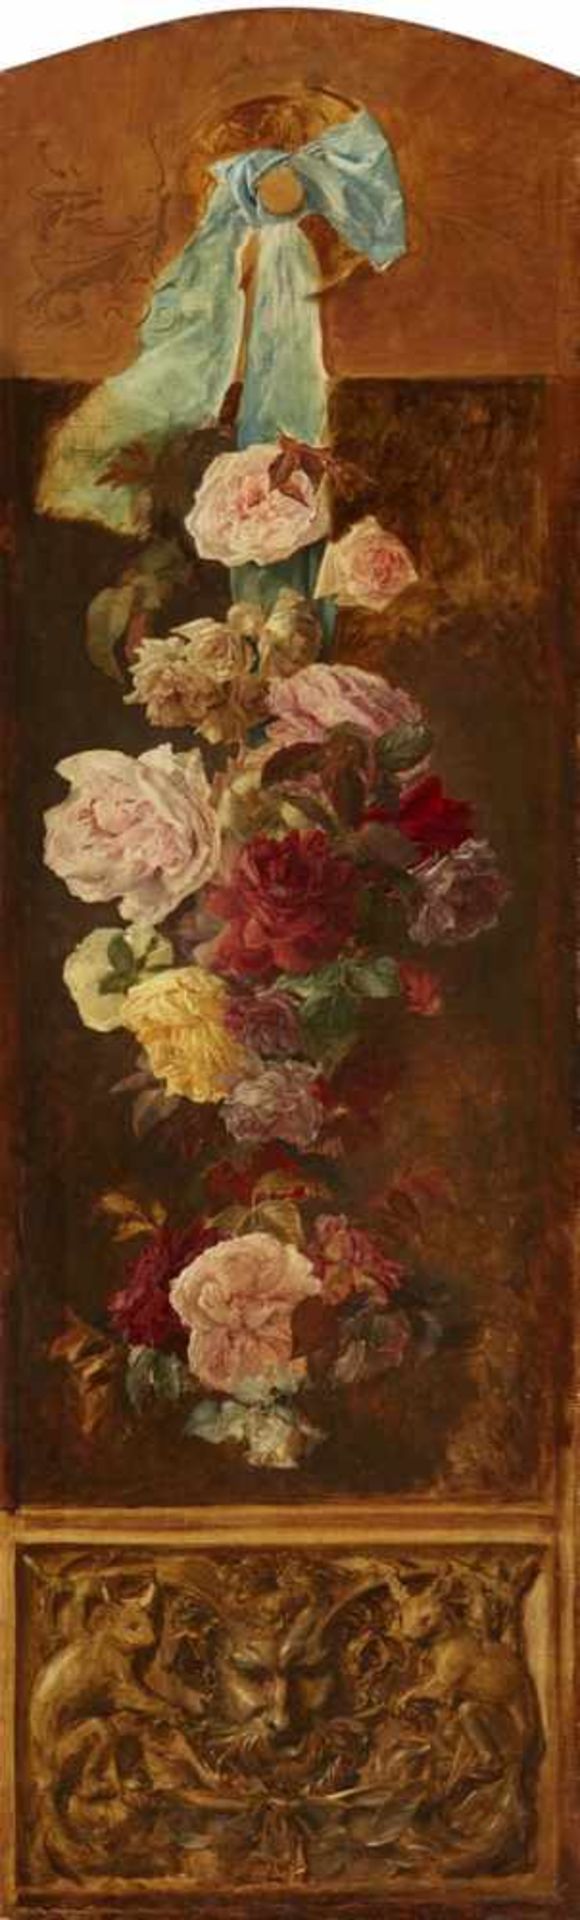 Probably Viennese artist, 19th centuryTrompe-l'oeil Still Life with a Flower Garland above a